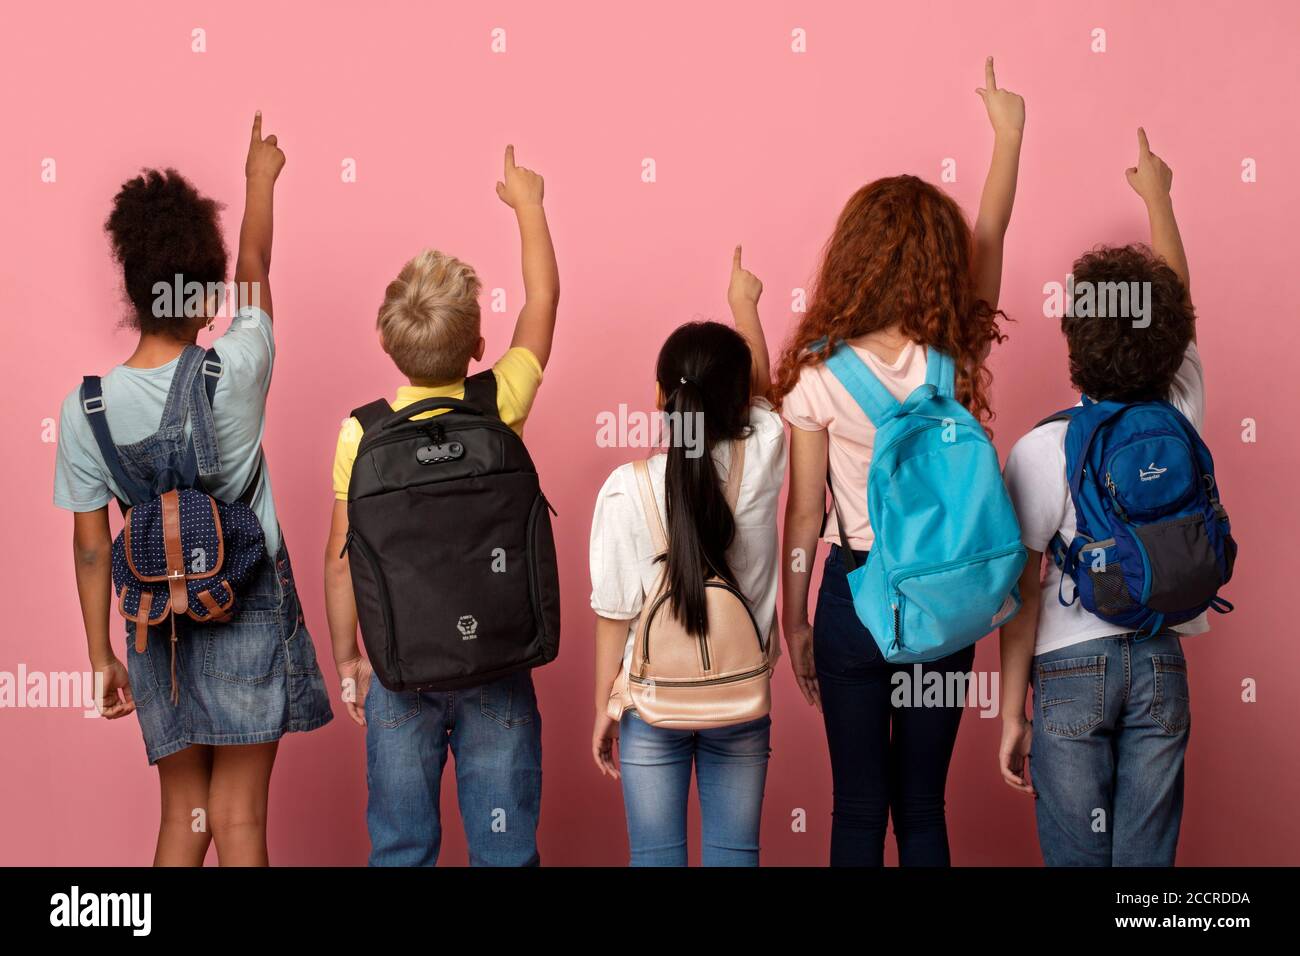 Back view of schoolkids with backpacks pointing up or touching virtual screen on pink background Stock Photo